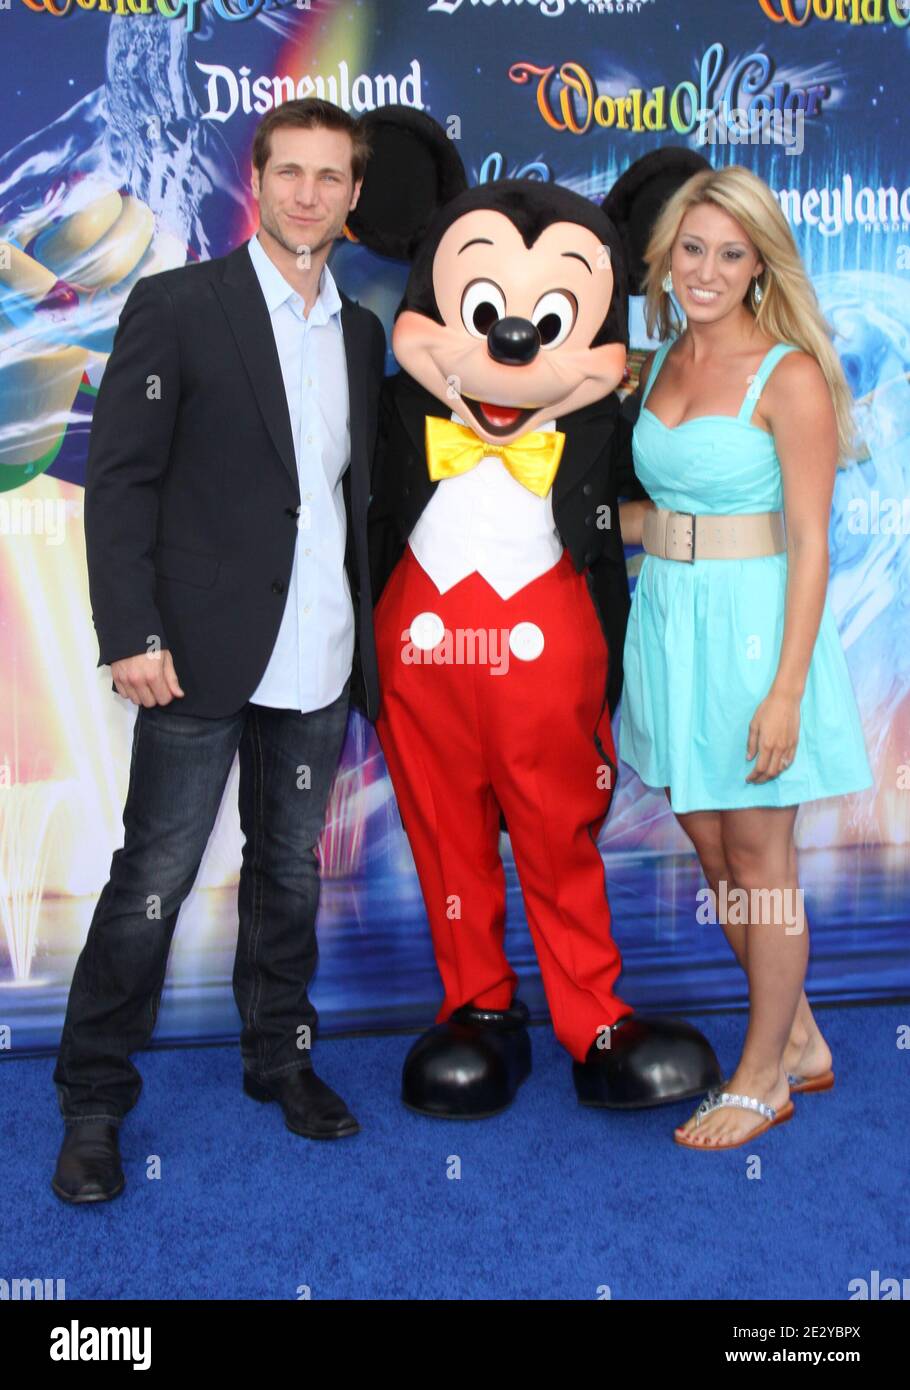 Jake Pavelka and Vienna Girardi arriving for the World Premiere of Disney's 'World of Color' held at Disney CA, USA Adventure in Anaheim, CA, USA on June 10, 2010. Photo by Wade Blaine/ABACAPRESS.COM Stock Photo